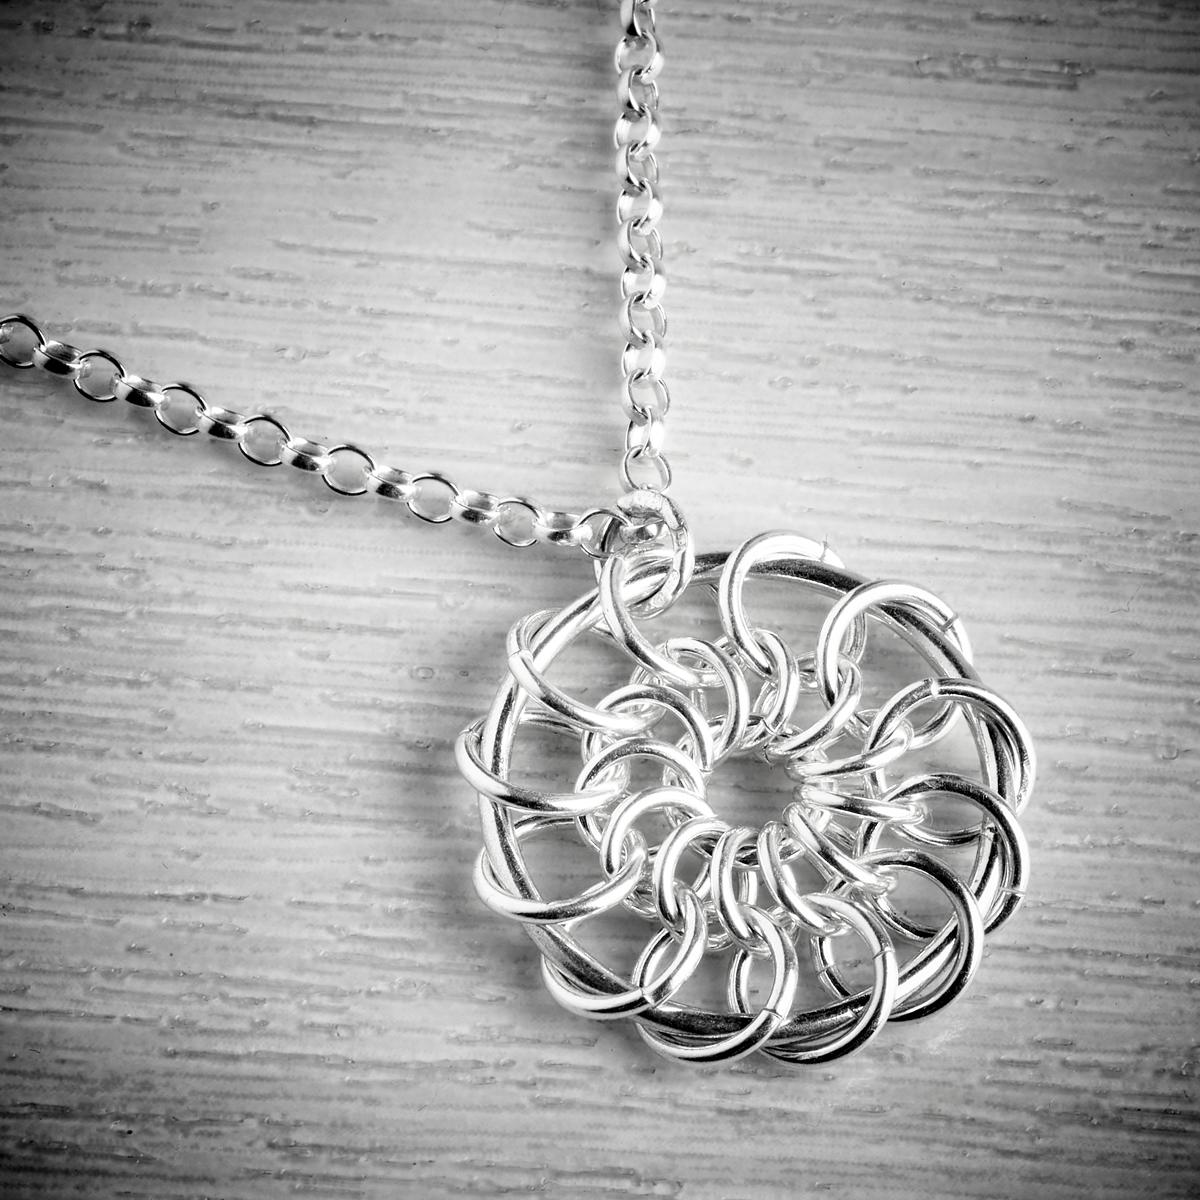 Silver Catherine Wheel Pendant By Laura Brookes Emma White And The